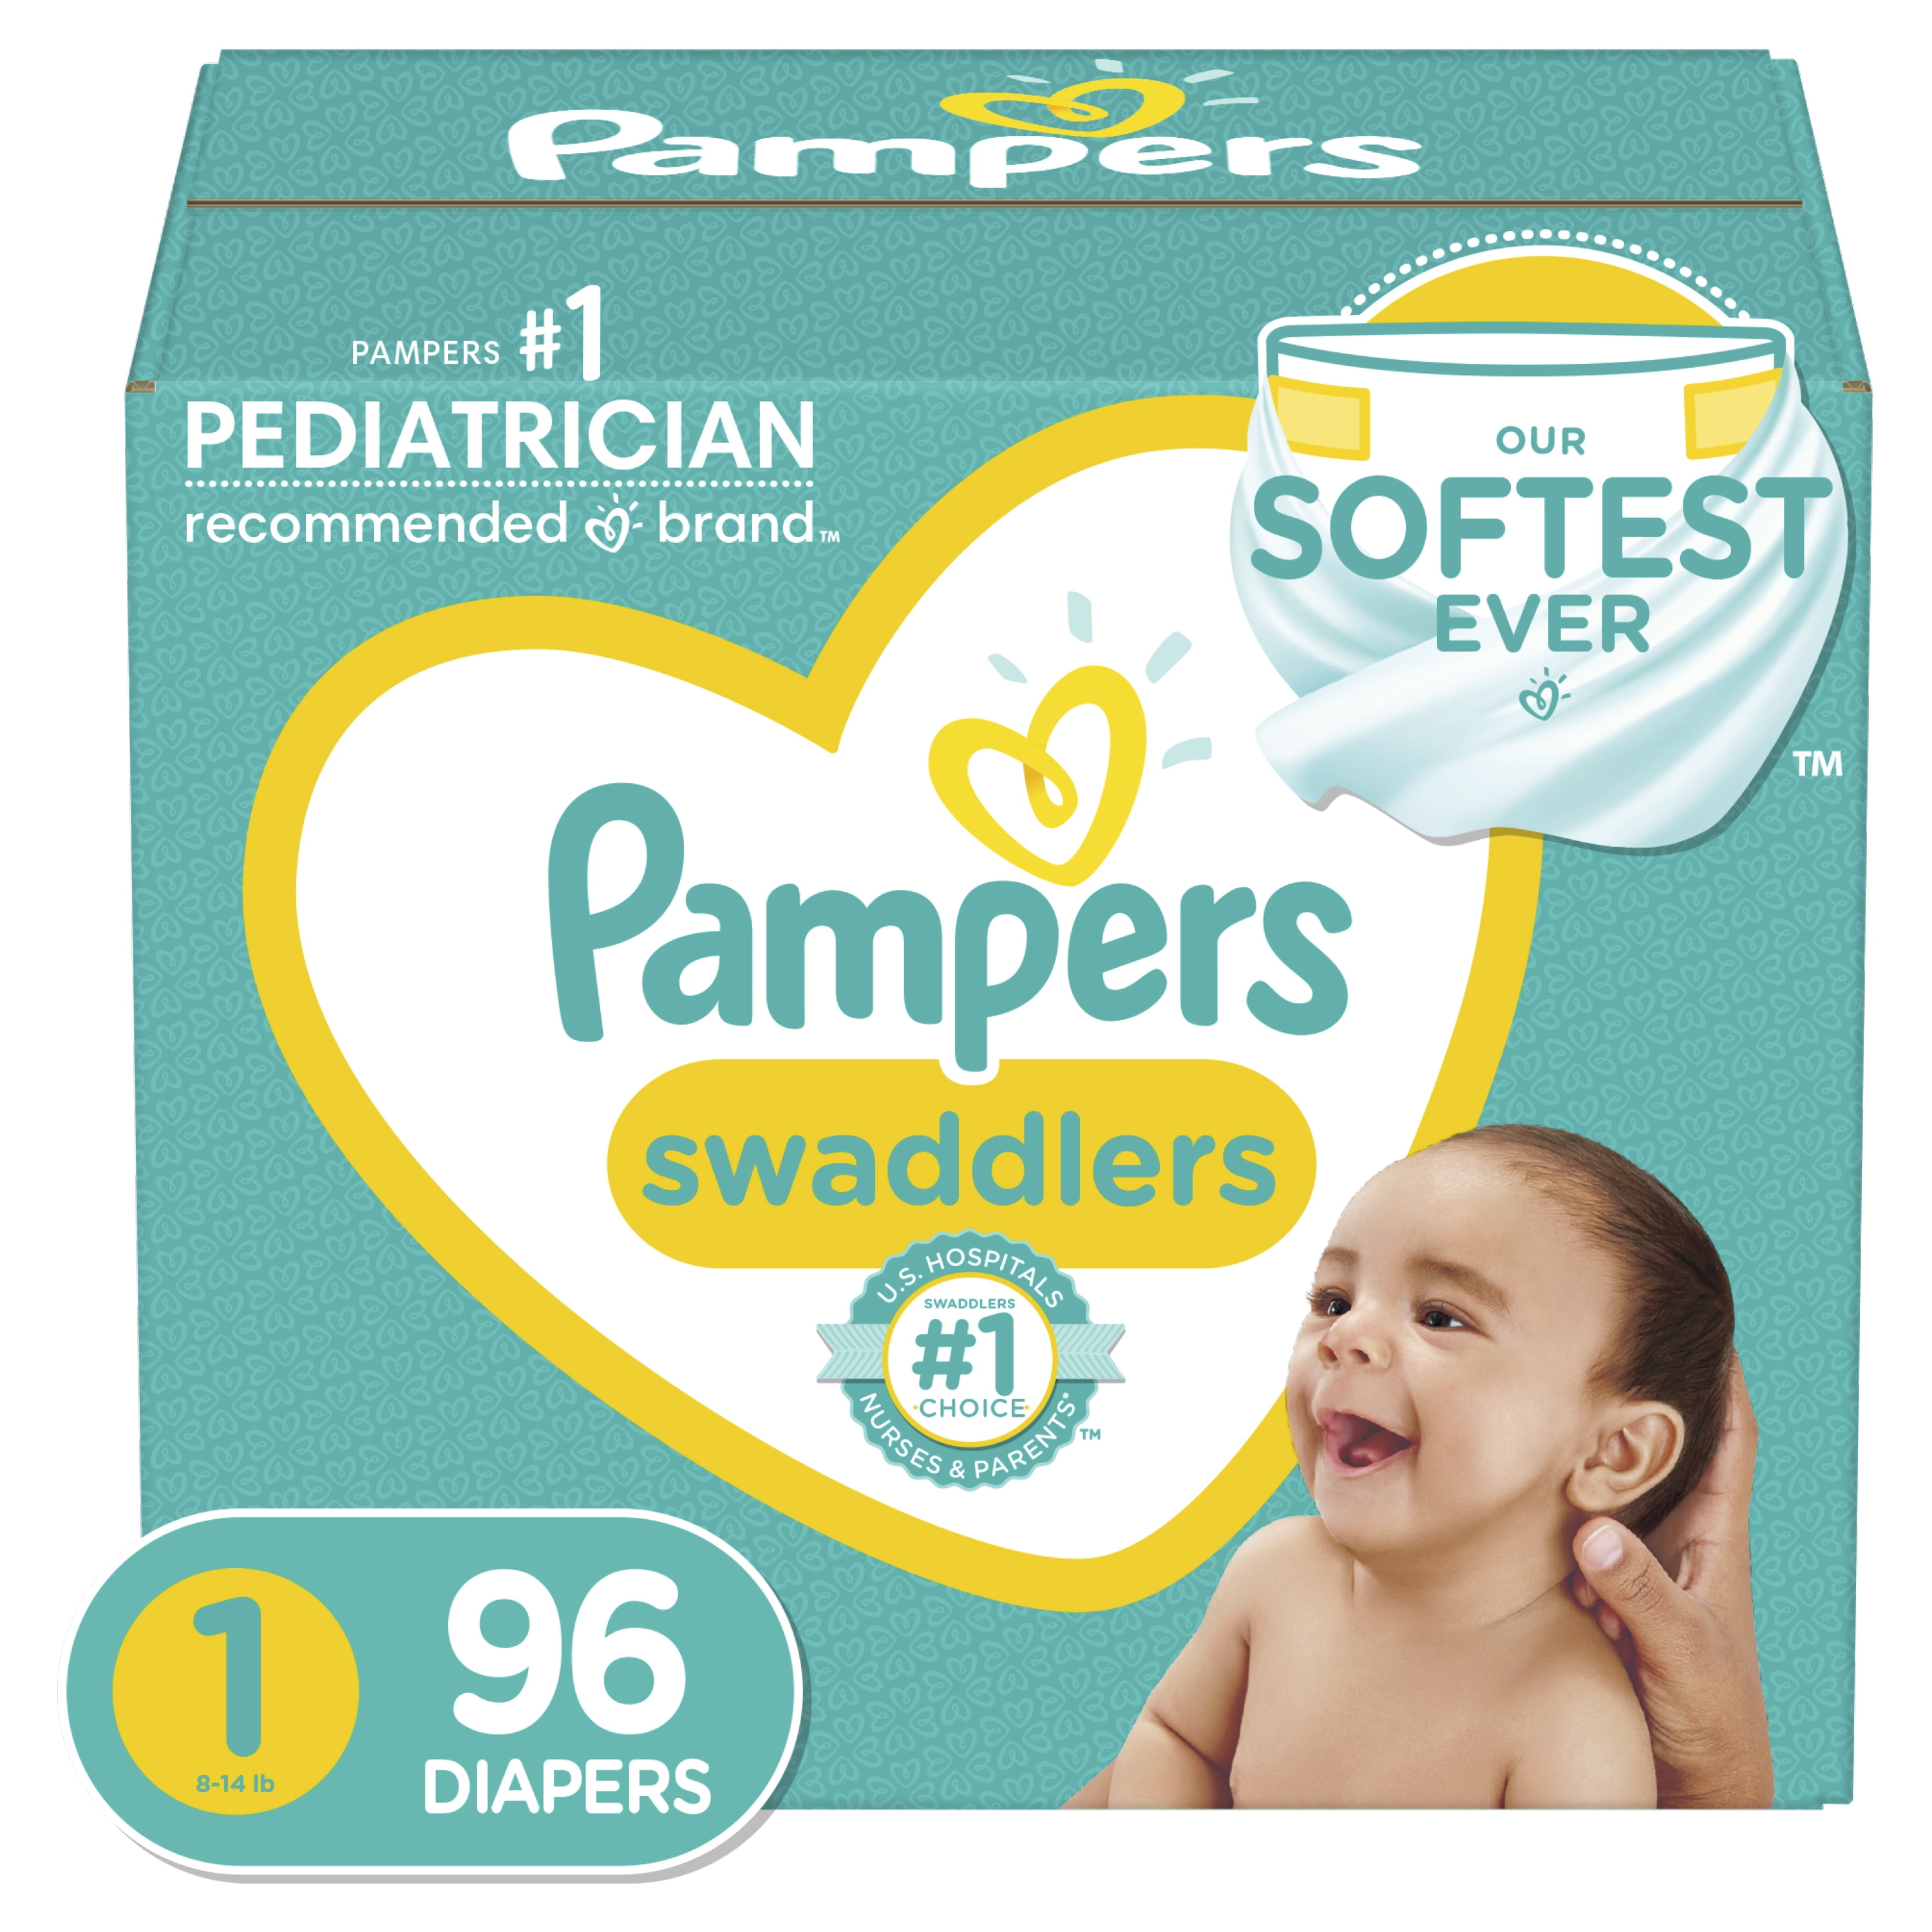 Pampers Swaddlers Diapers (Choose Your Size & Count) - 1